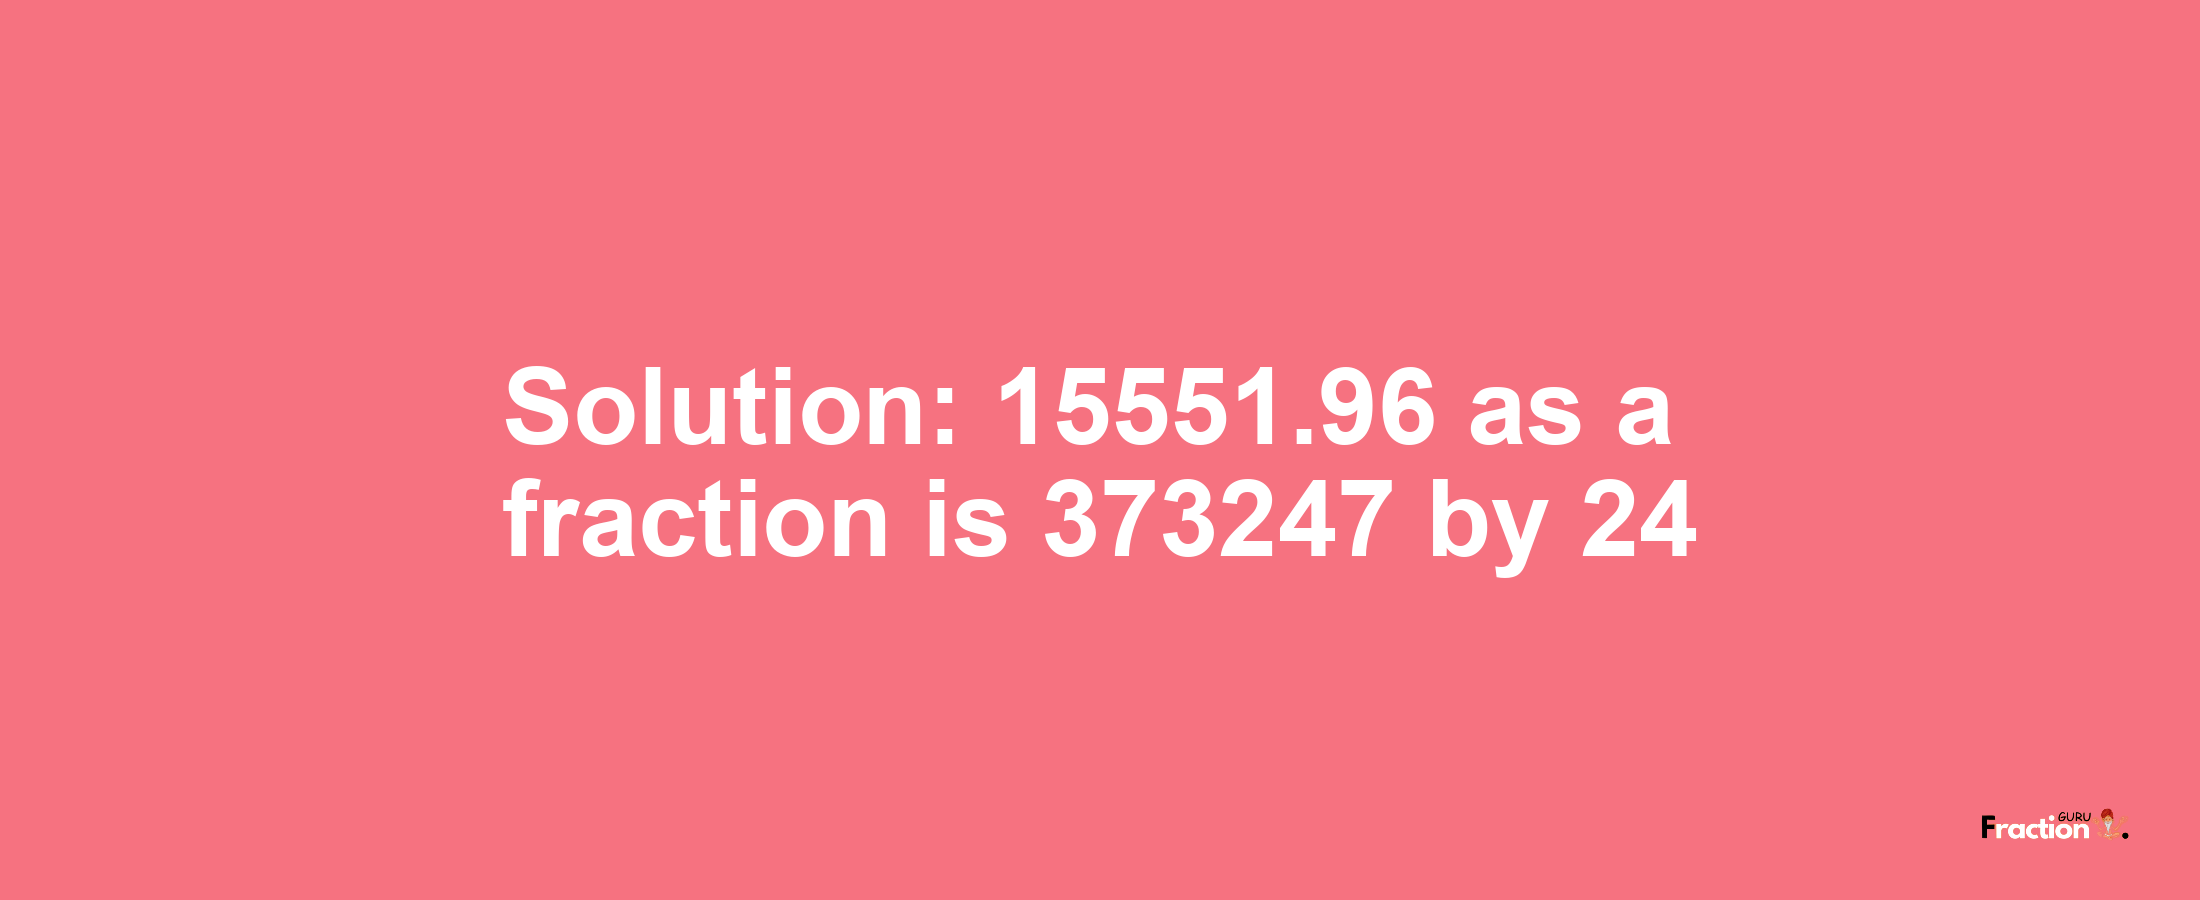 Solution:15551.96 as a fraction is 373247/24